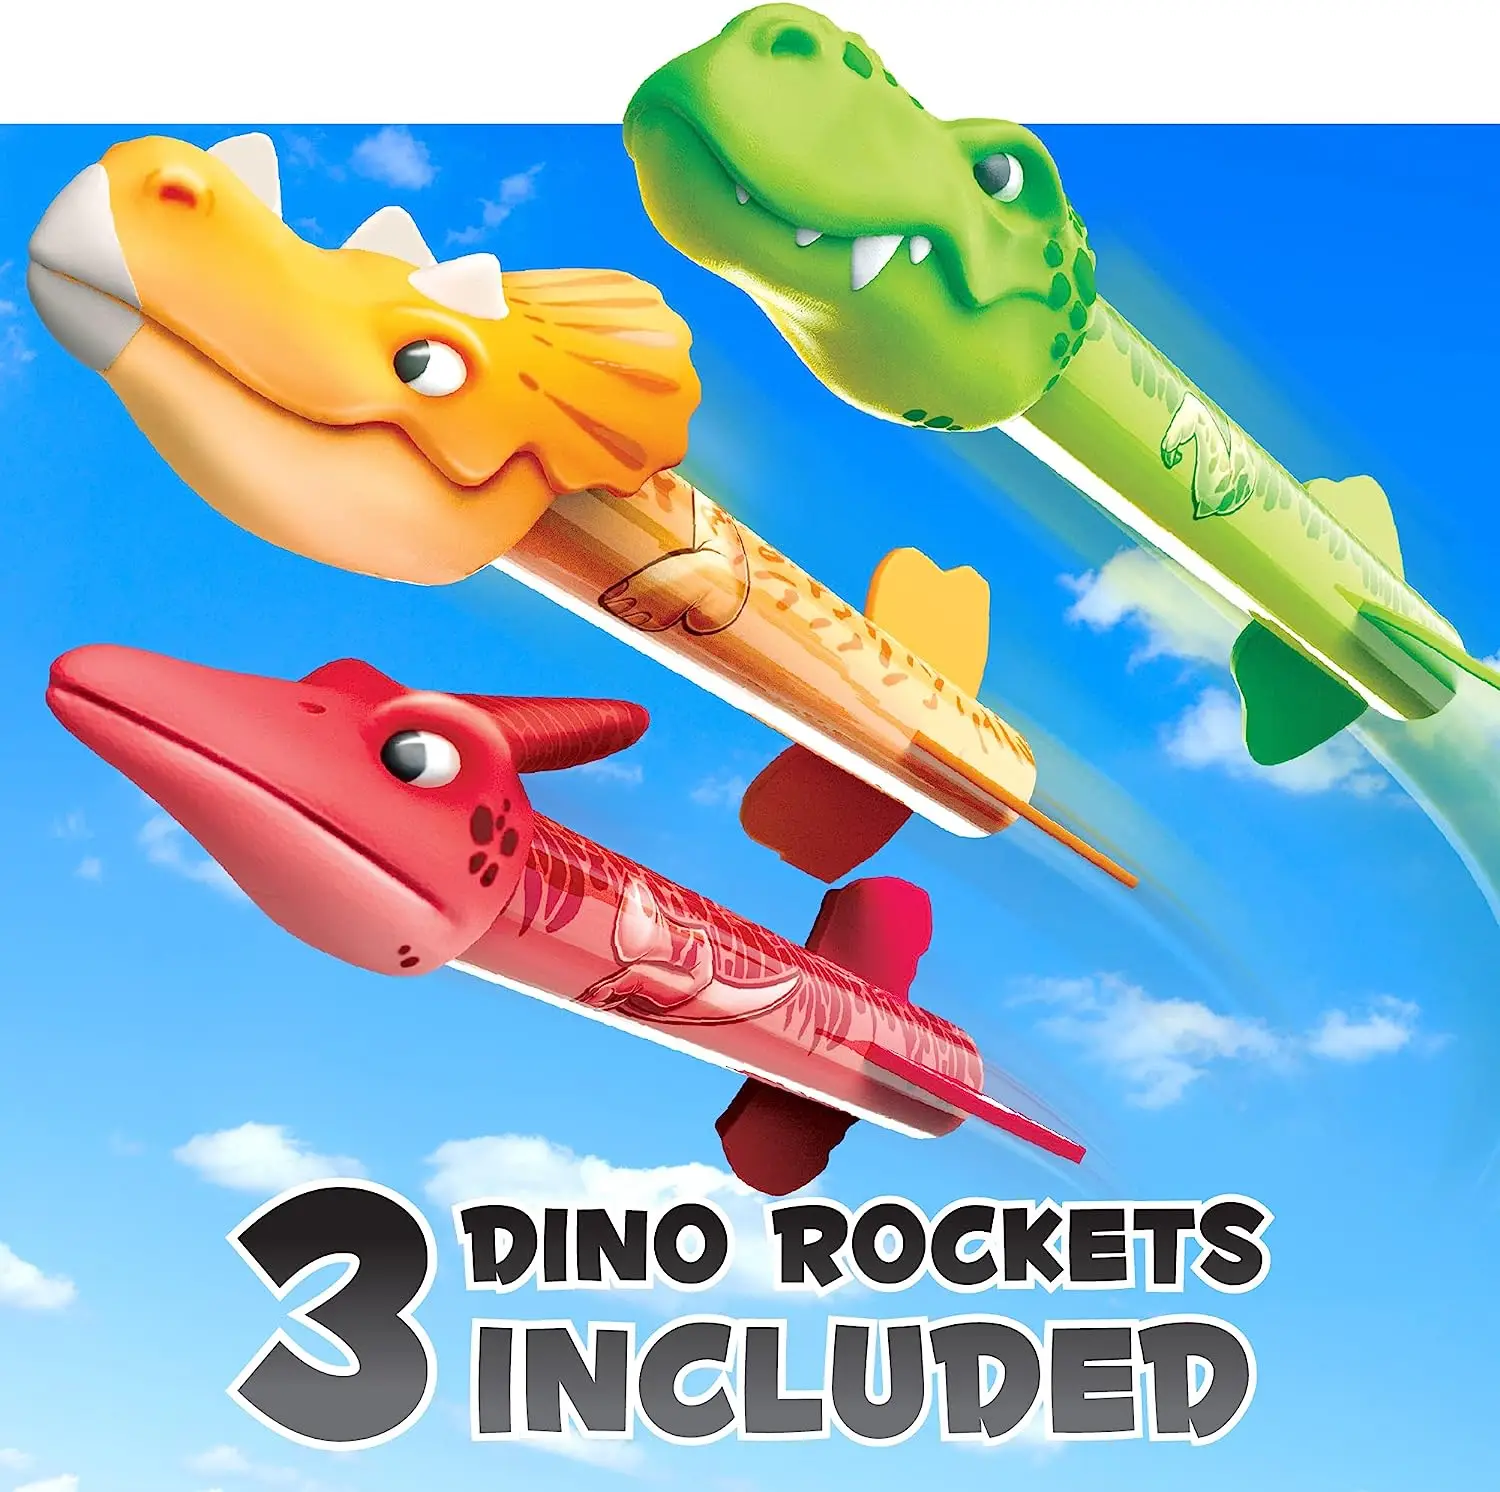 EPT Water Stomp Replacement Dinosaur Rocket Launcher Toy for Kids